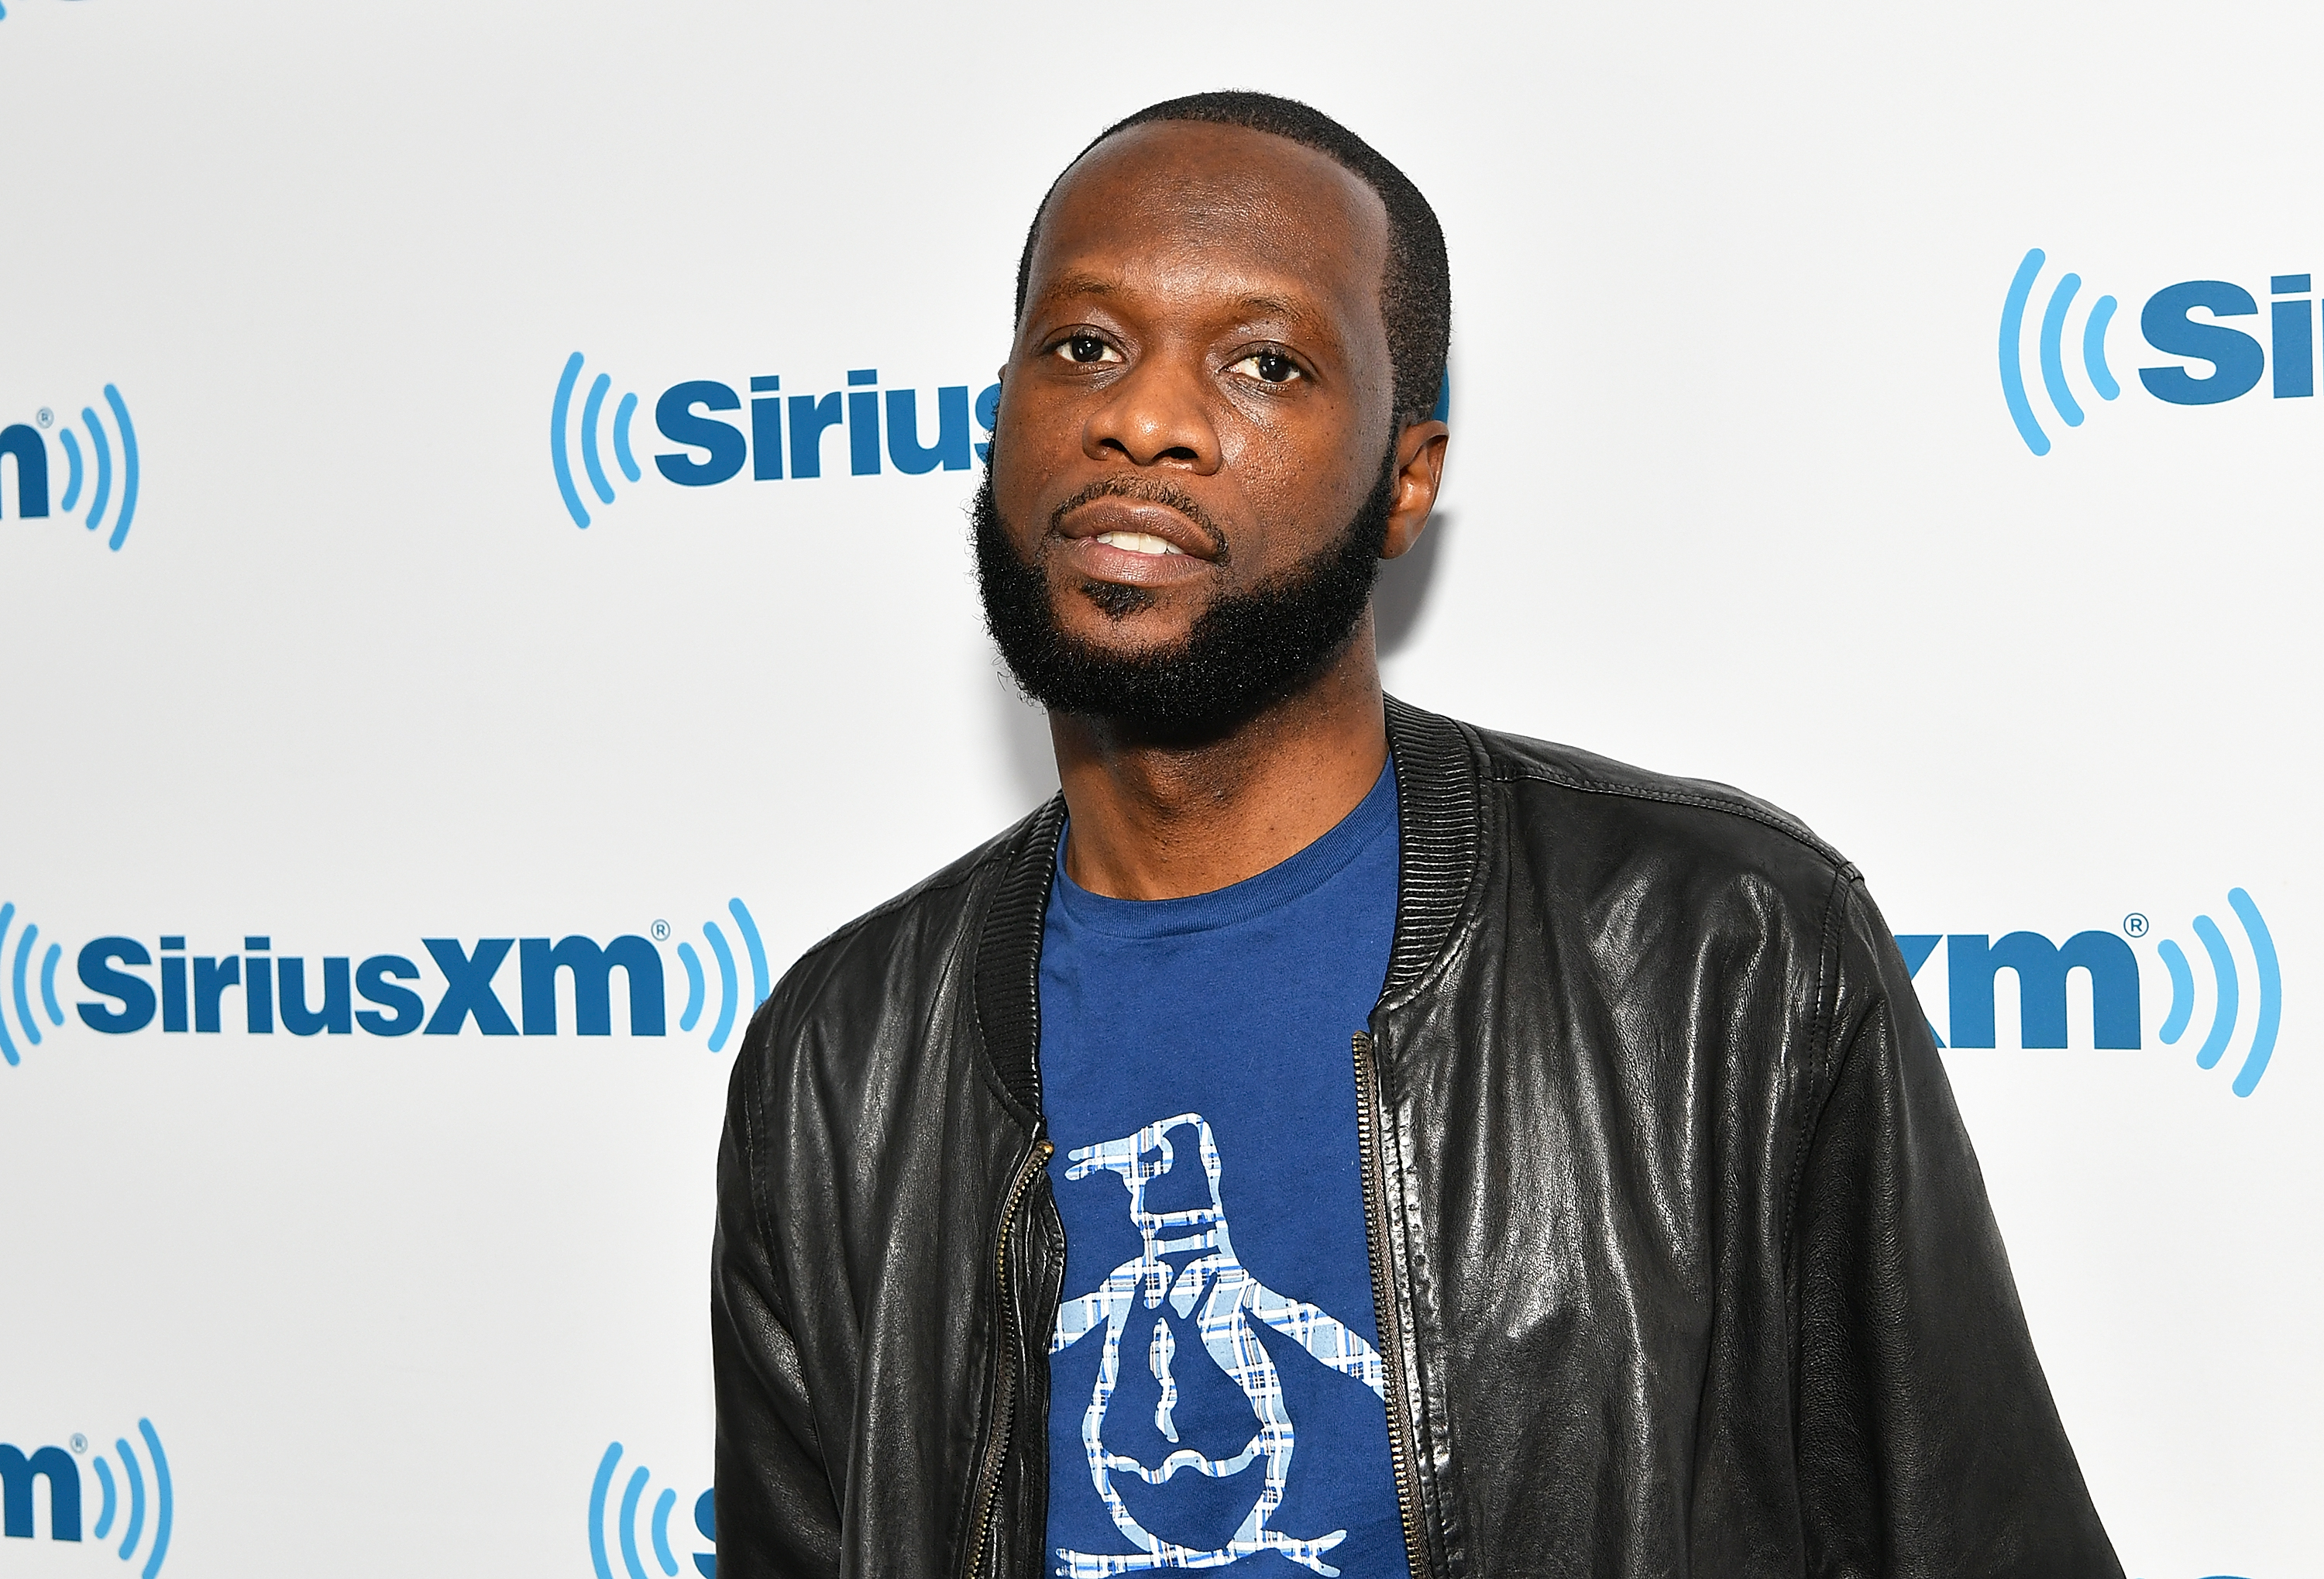 Fugees' Pras Michel Convicted of Criminal Conspiracy